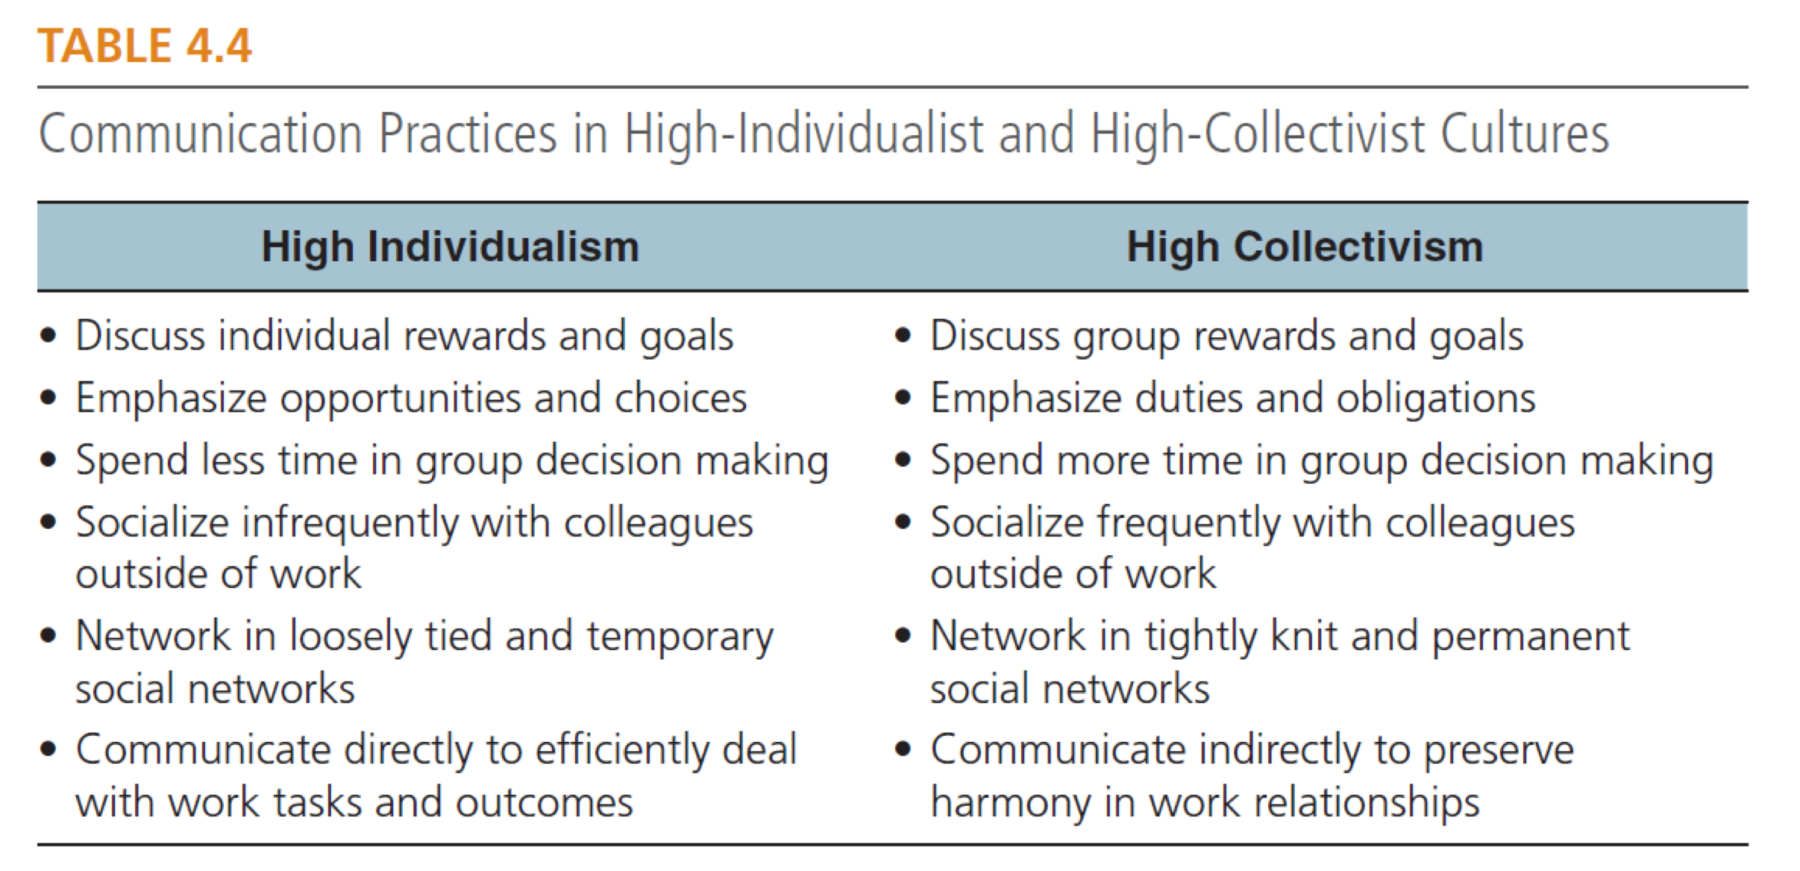 Communication Practices in High Individualist and High Collectivist Cultures